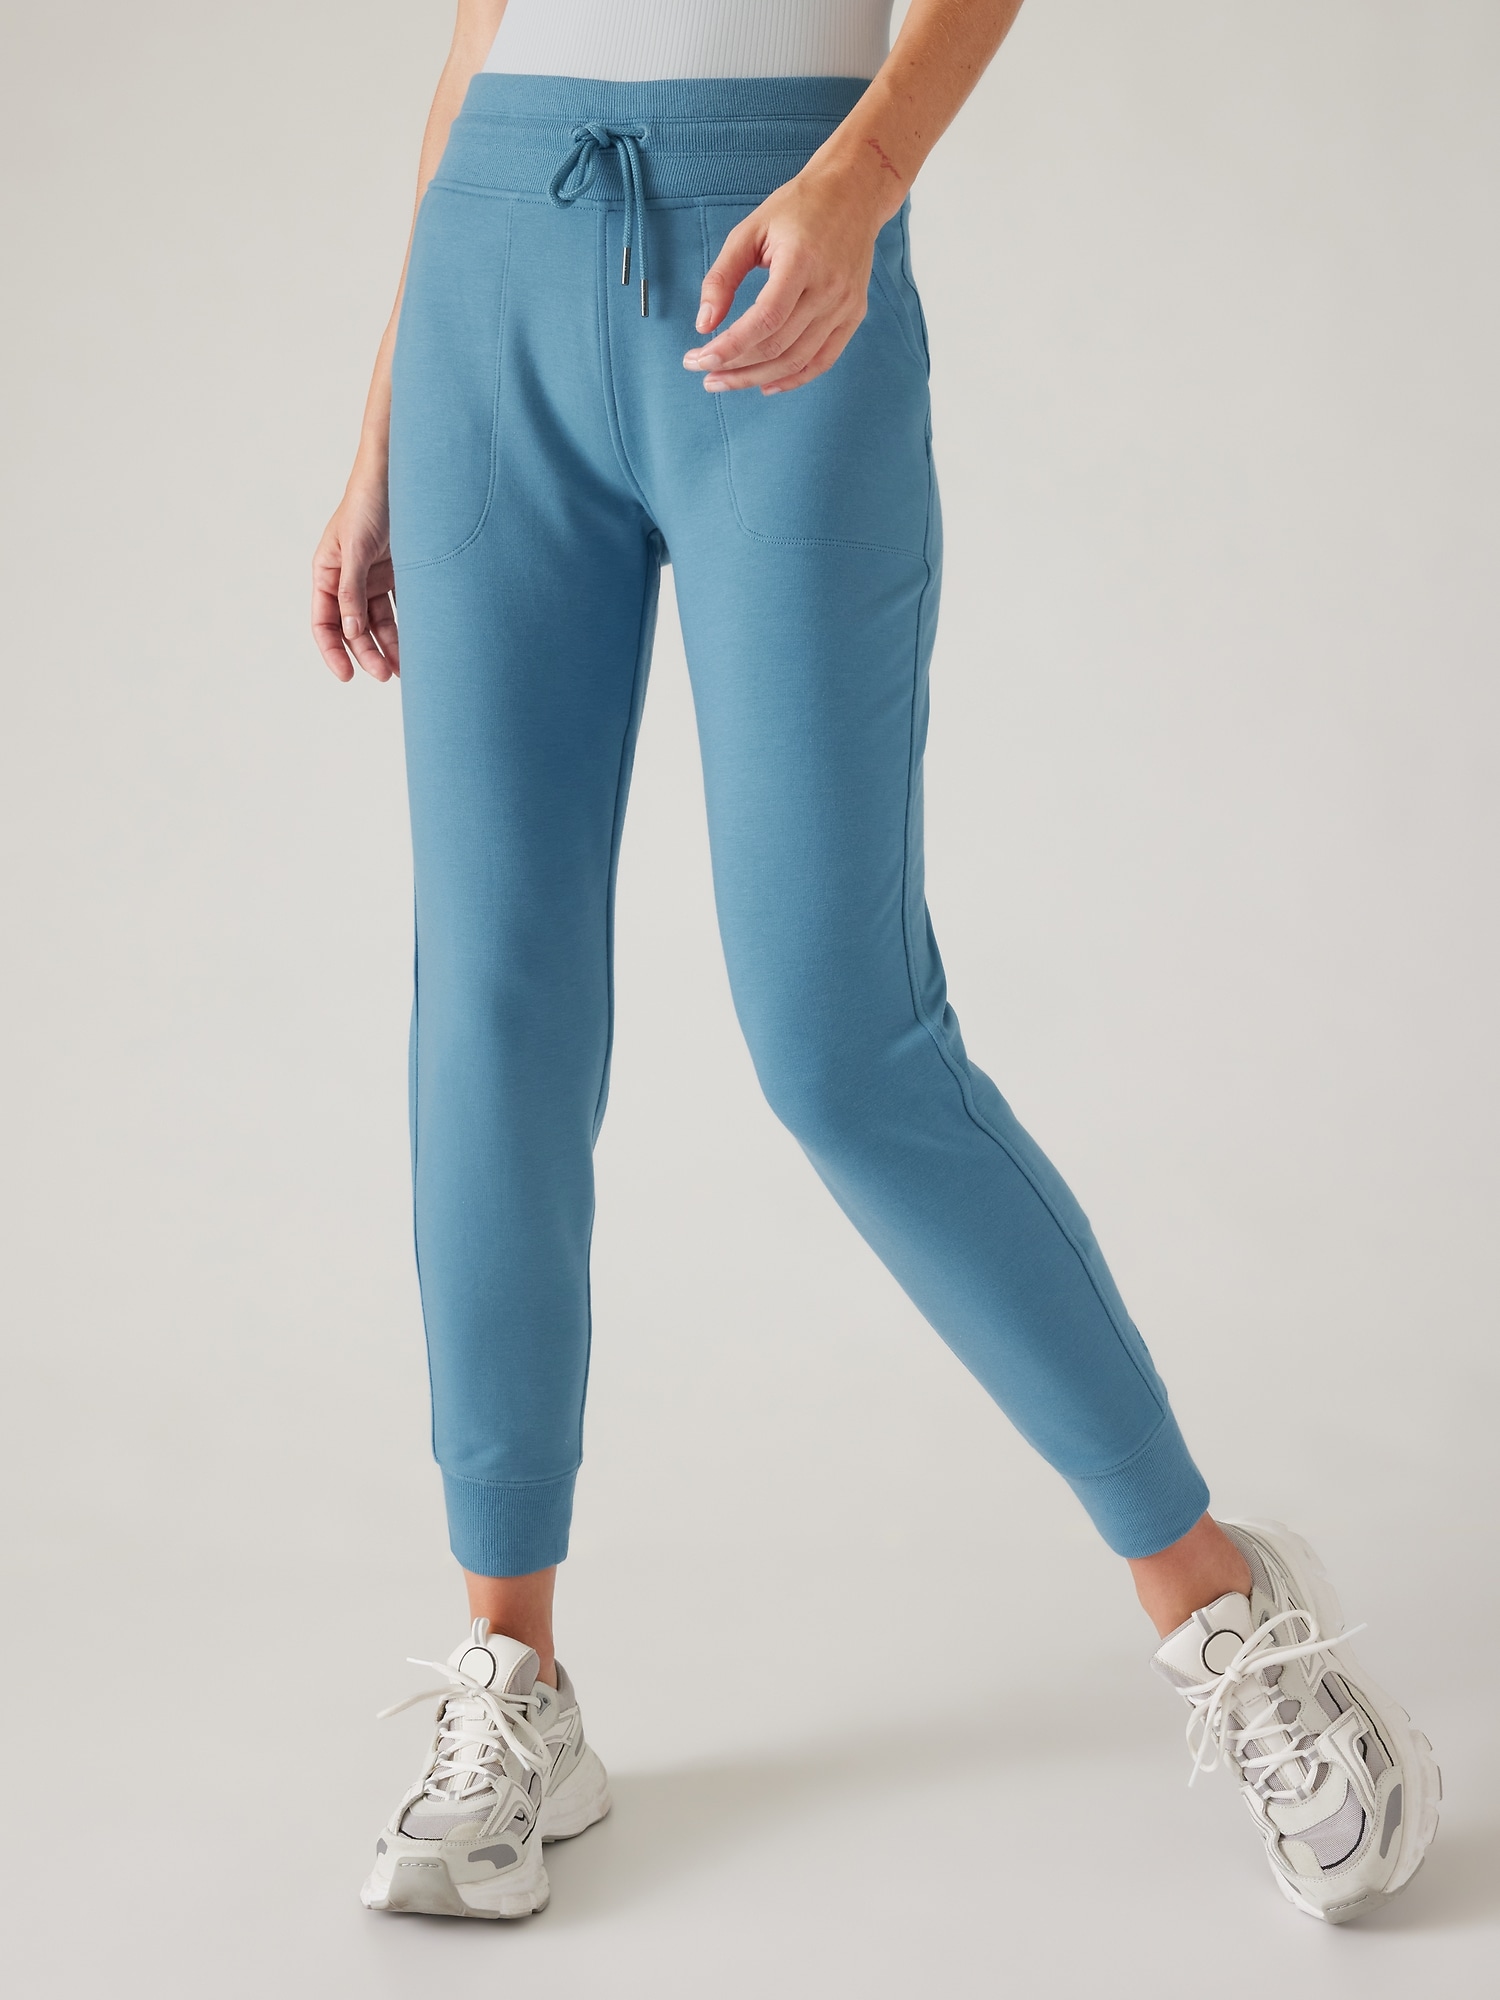 Fit Pics - Ready to Rulu (2) + Align Jogger (2) : r/lululemon